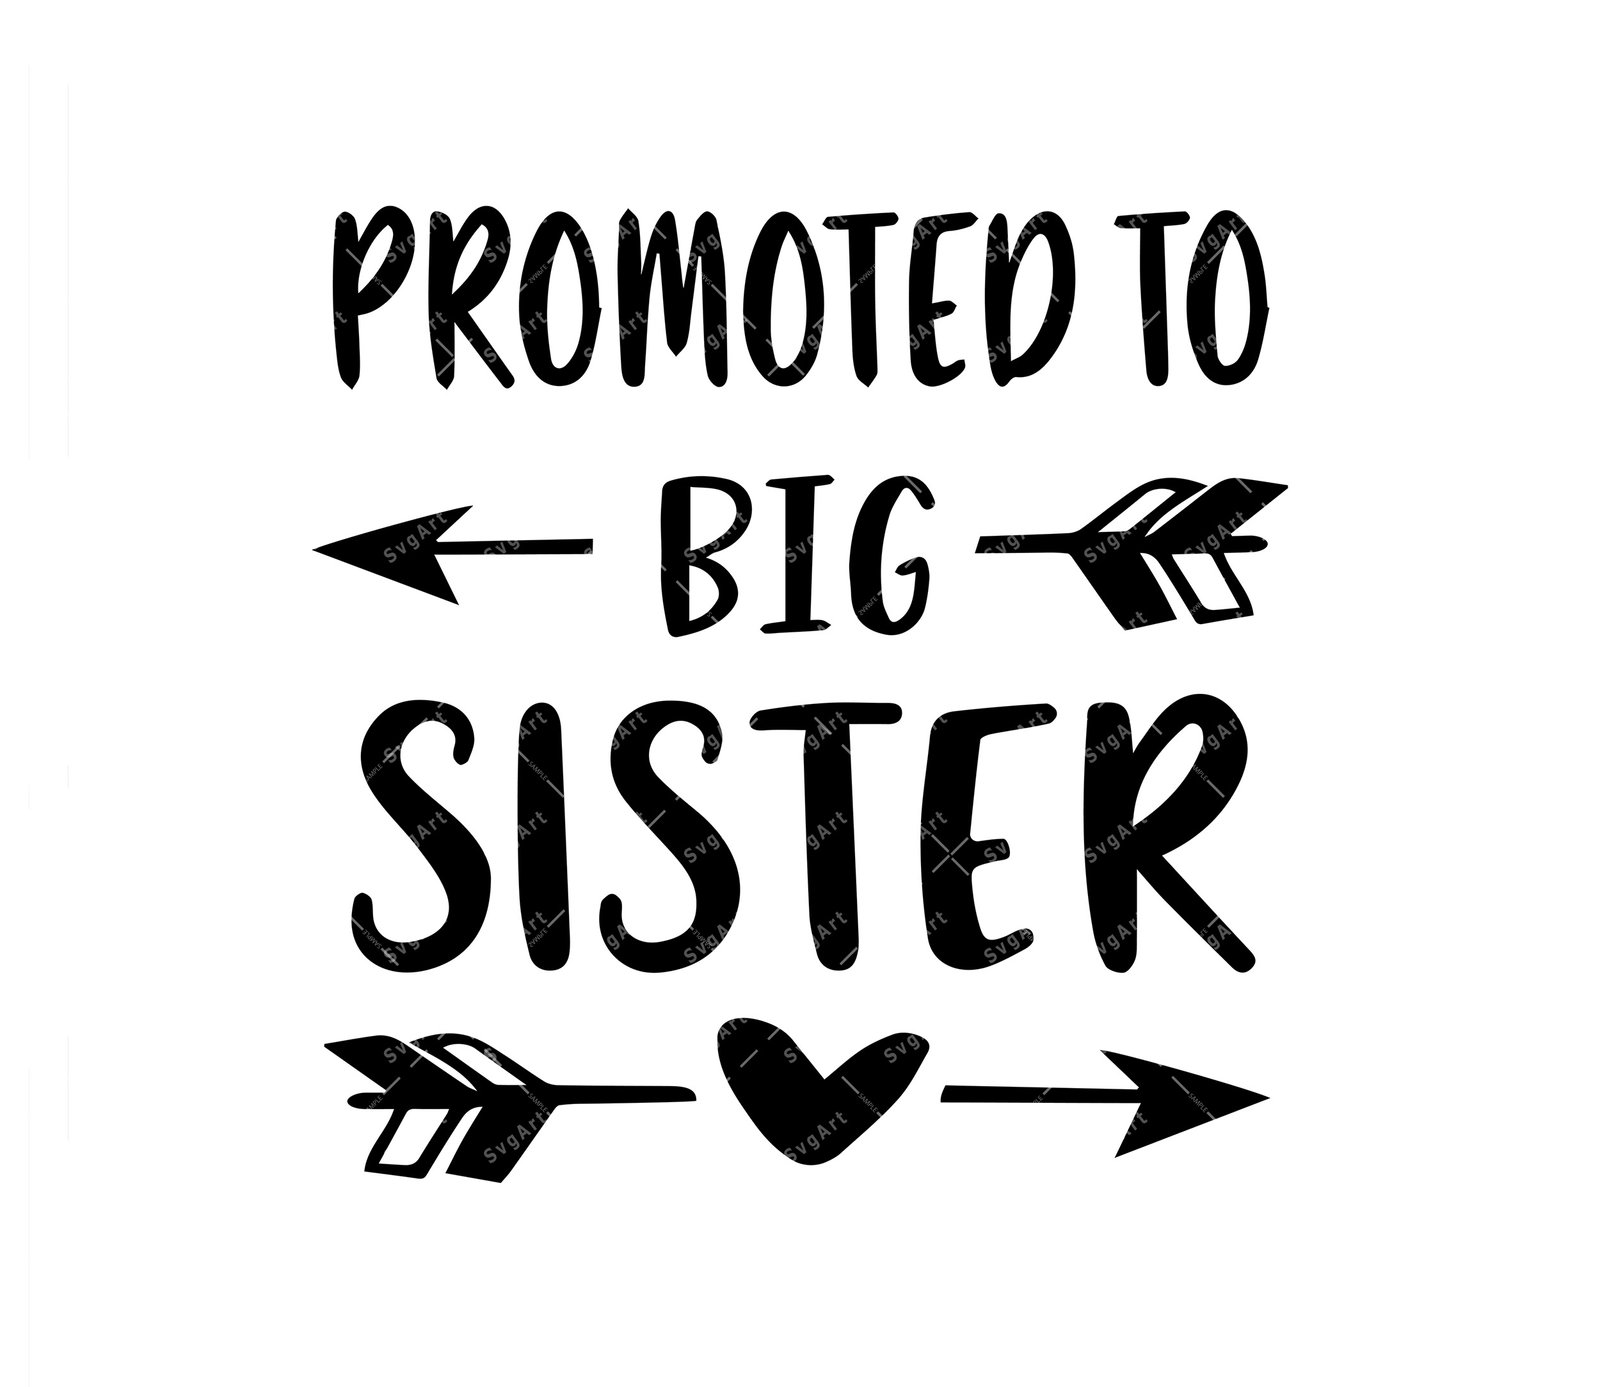 New Baby Svg New Sister Svg Leveled Up To Big Sister Svg Family Svg Pregnancy Announcement Svg Cut File For Cricut Silhouette Baby Svg